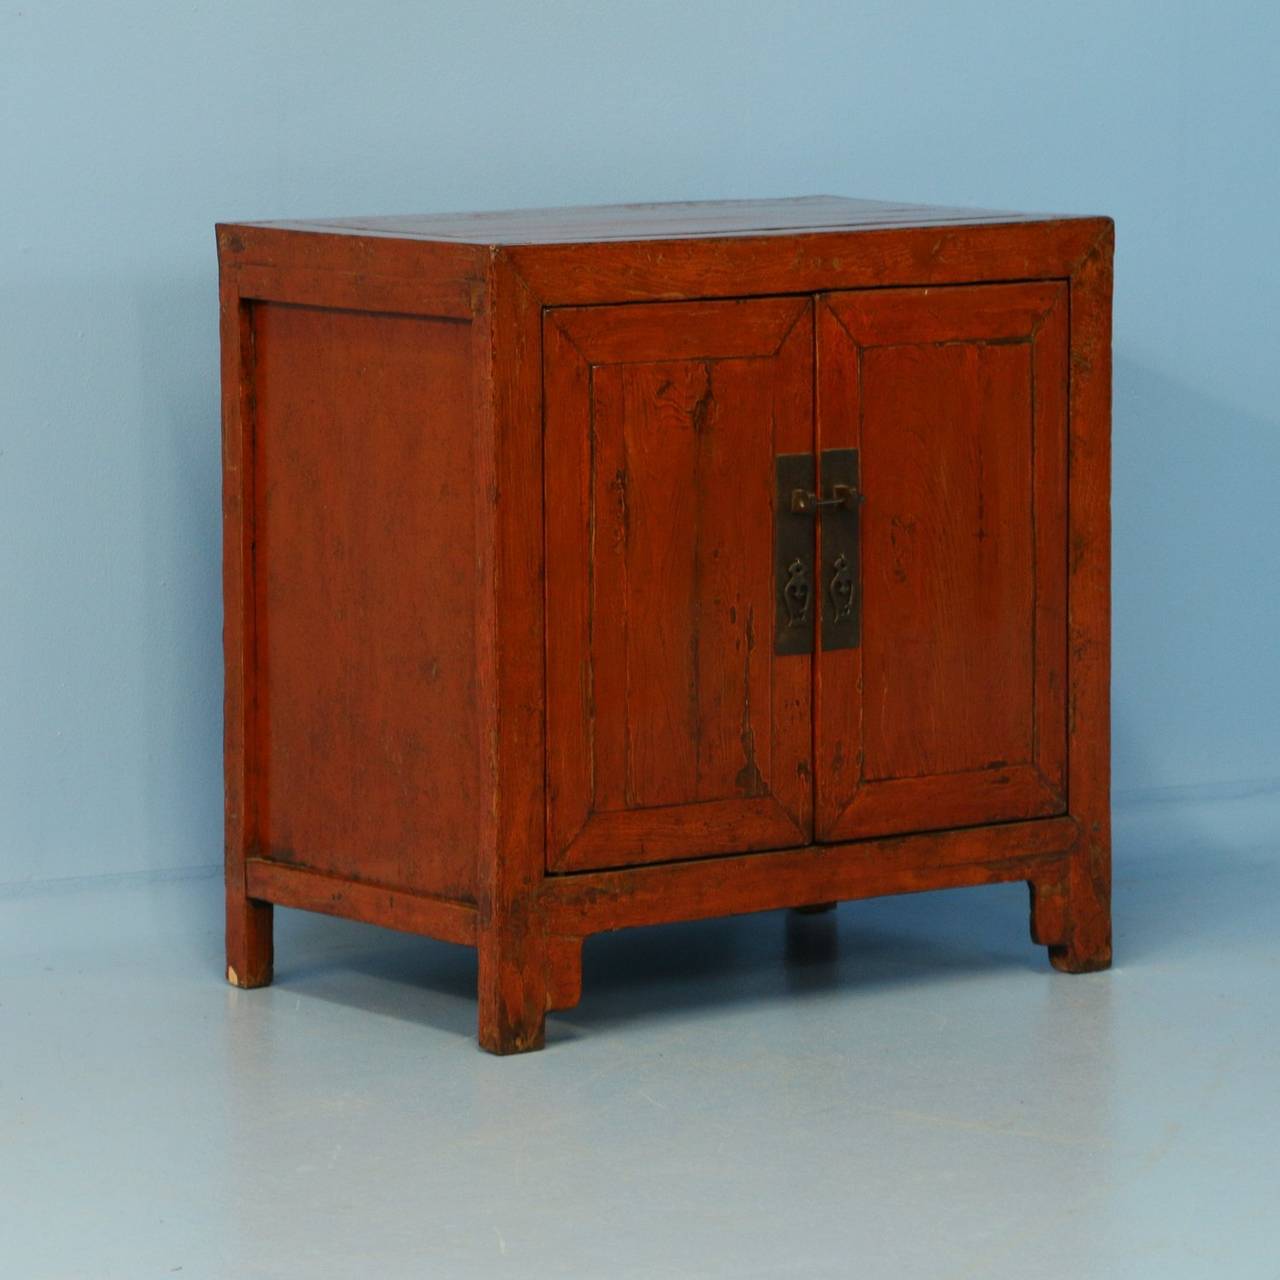 The original brick red paint comes to life with the hand-buffed lacquer finish on this Chinese sideboard. When viewing the close up photos, you will see areas where the paint has been worn down through the years of use to the natural wood below.